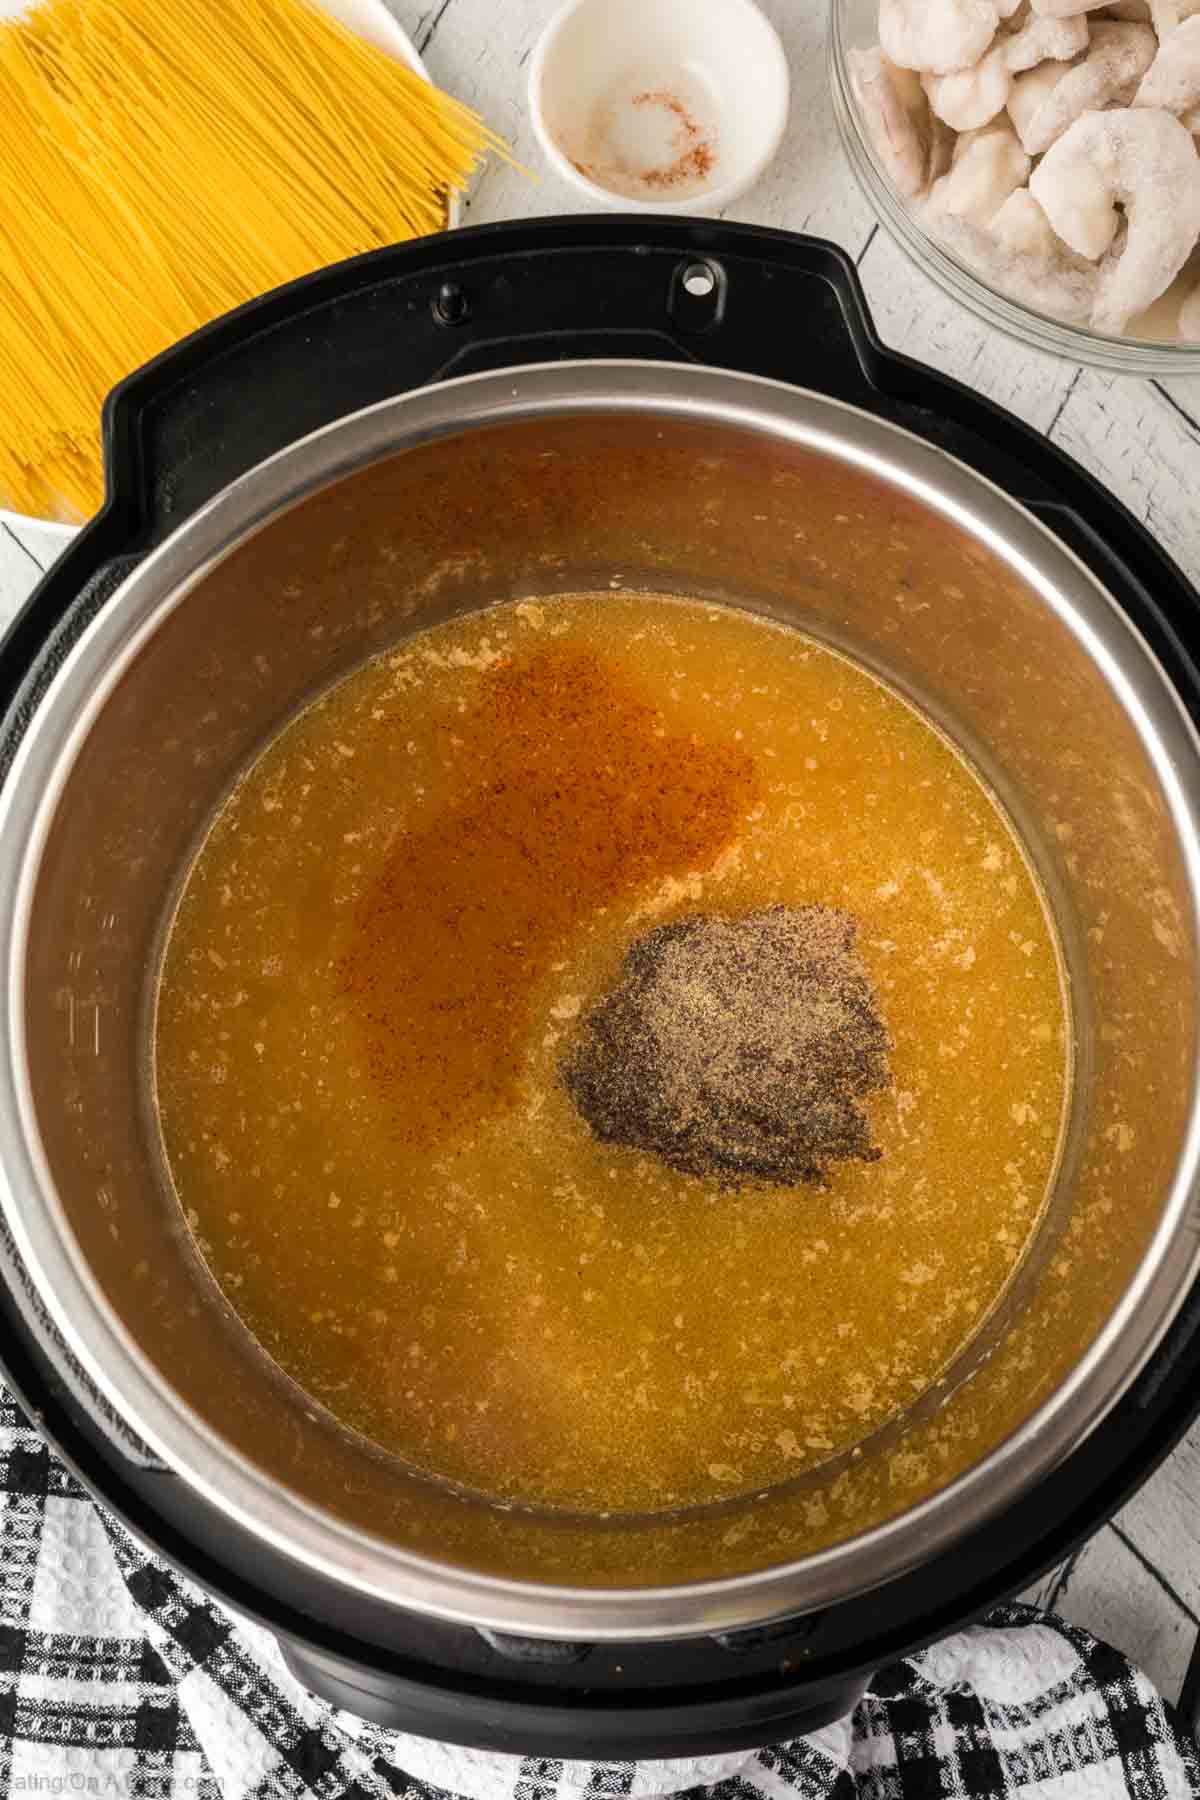 Adding the seasoning to the broth mixture in the instant pot